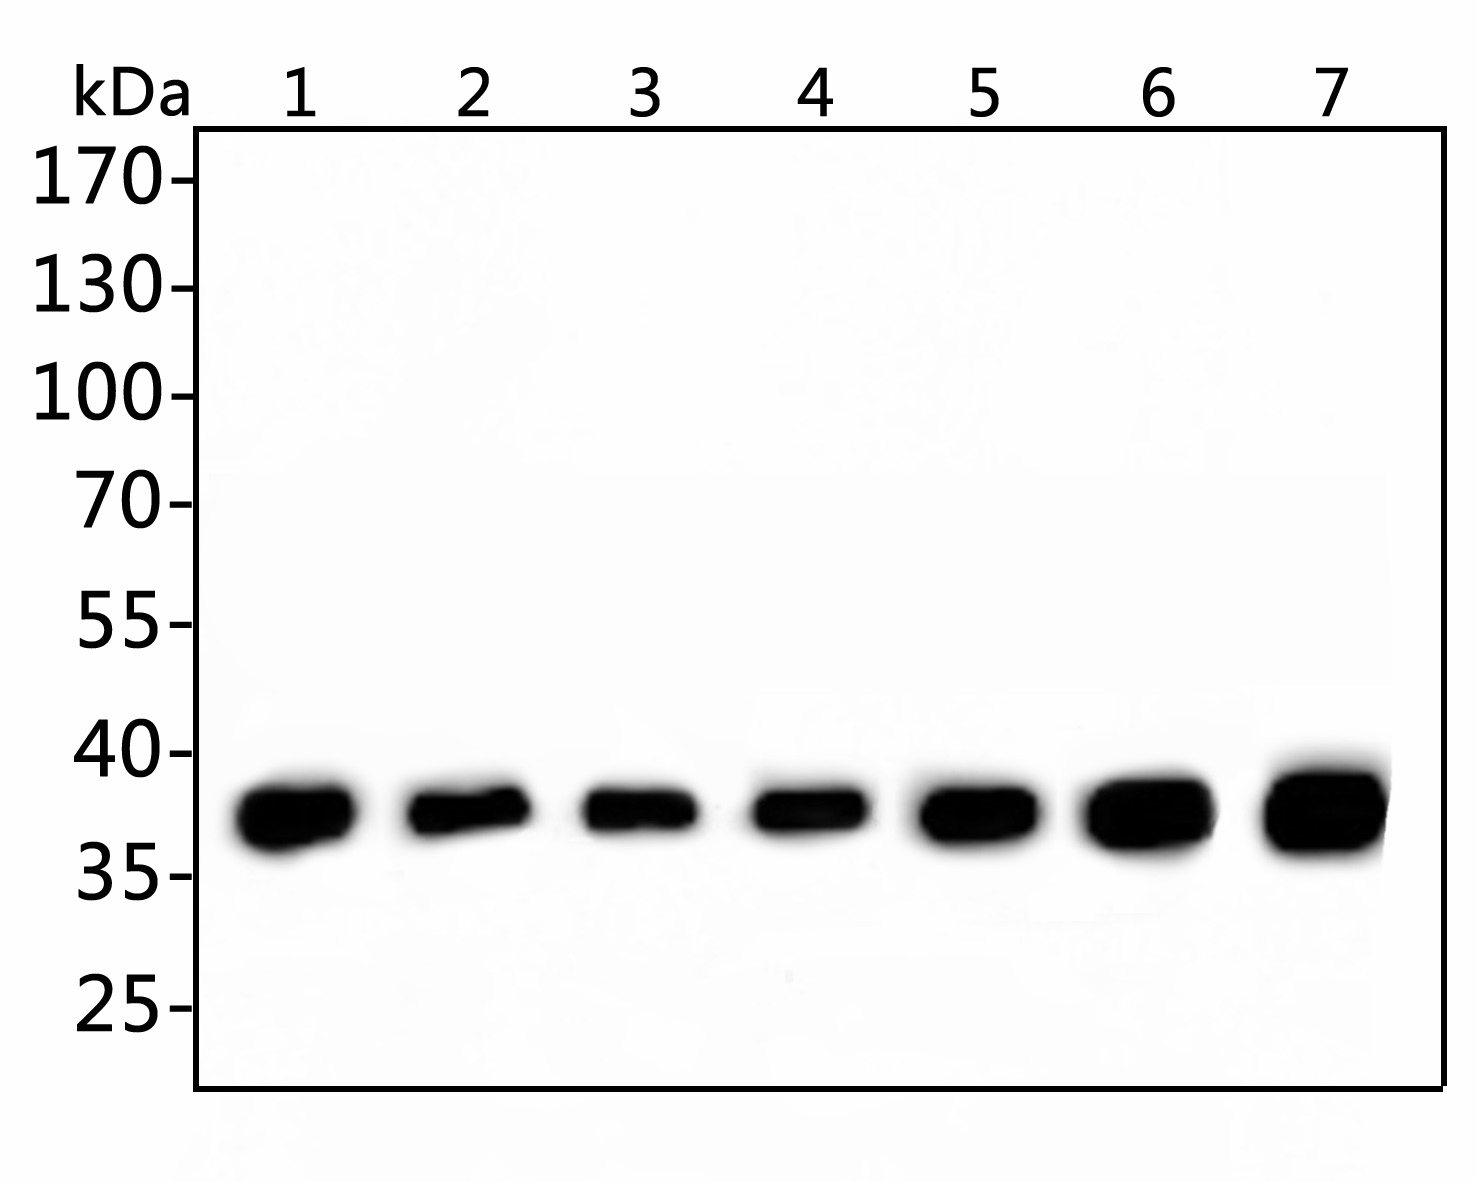 Western blot analysis of GAPDH on different lysates. Proteins were transferred to a PVDF membrane and blocked with 5% NFDM/TBST for 1 hour at room temperature. The primary antibody (ET1601-4, 1/5,000) was used in 5% NFDM/TBST at room temperature for 1 hour. Goat Anti-Rabbit IgG - HRP Secondary Antibody (HA1001) at 1:200,000 dilution was used for 45 mins at room temperature.<br />
<br />
Positive control: <br />
Lane 1: PC-3 cell lysate, 10 µg/Lane<br />
Lane 2: Mouse colon tissue lysate, 20 µg/Lane<br />
Lane 3: SHSY-5Y cell lysate, 10 µg/Lane<br />
Lane 4: PC-3 cell lysate, 10 µg/Lane<br />
Lane 5: NIH/3T3 cell lysate, 10 µg/Lane<br />
Lane 6: SKBR3 cell lysate, 10 µg/Lane<br />
Lane 7: Rat brain tissue lysate, 20 µg/Lane